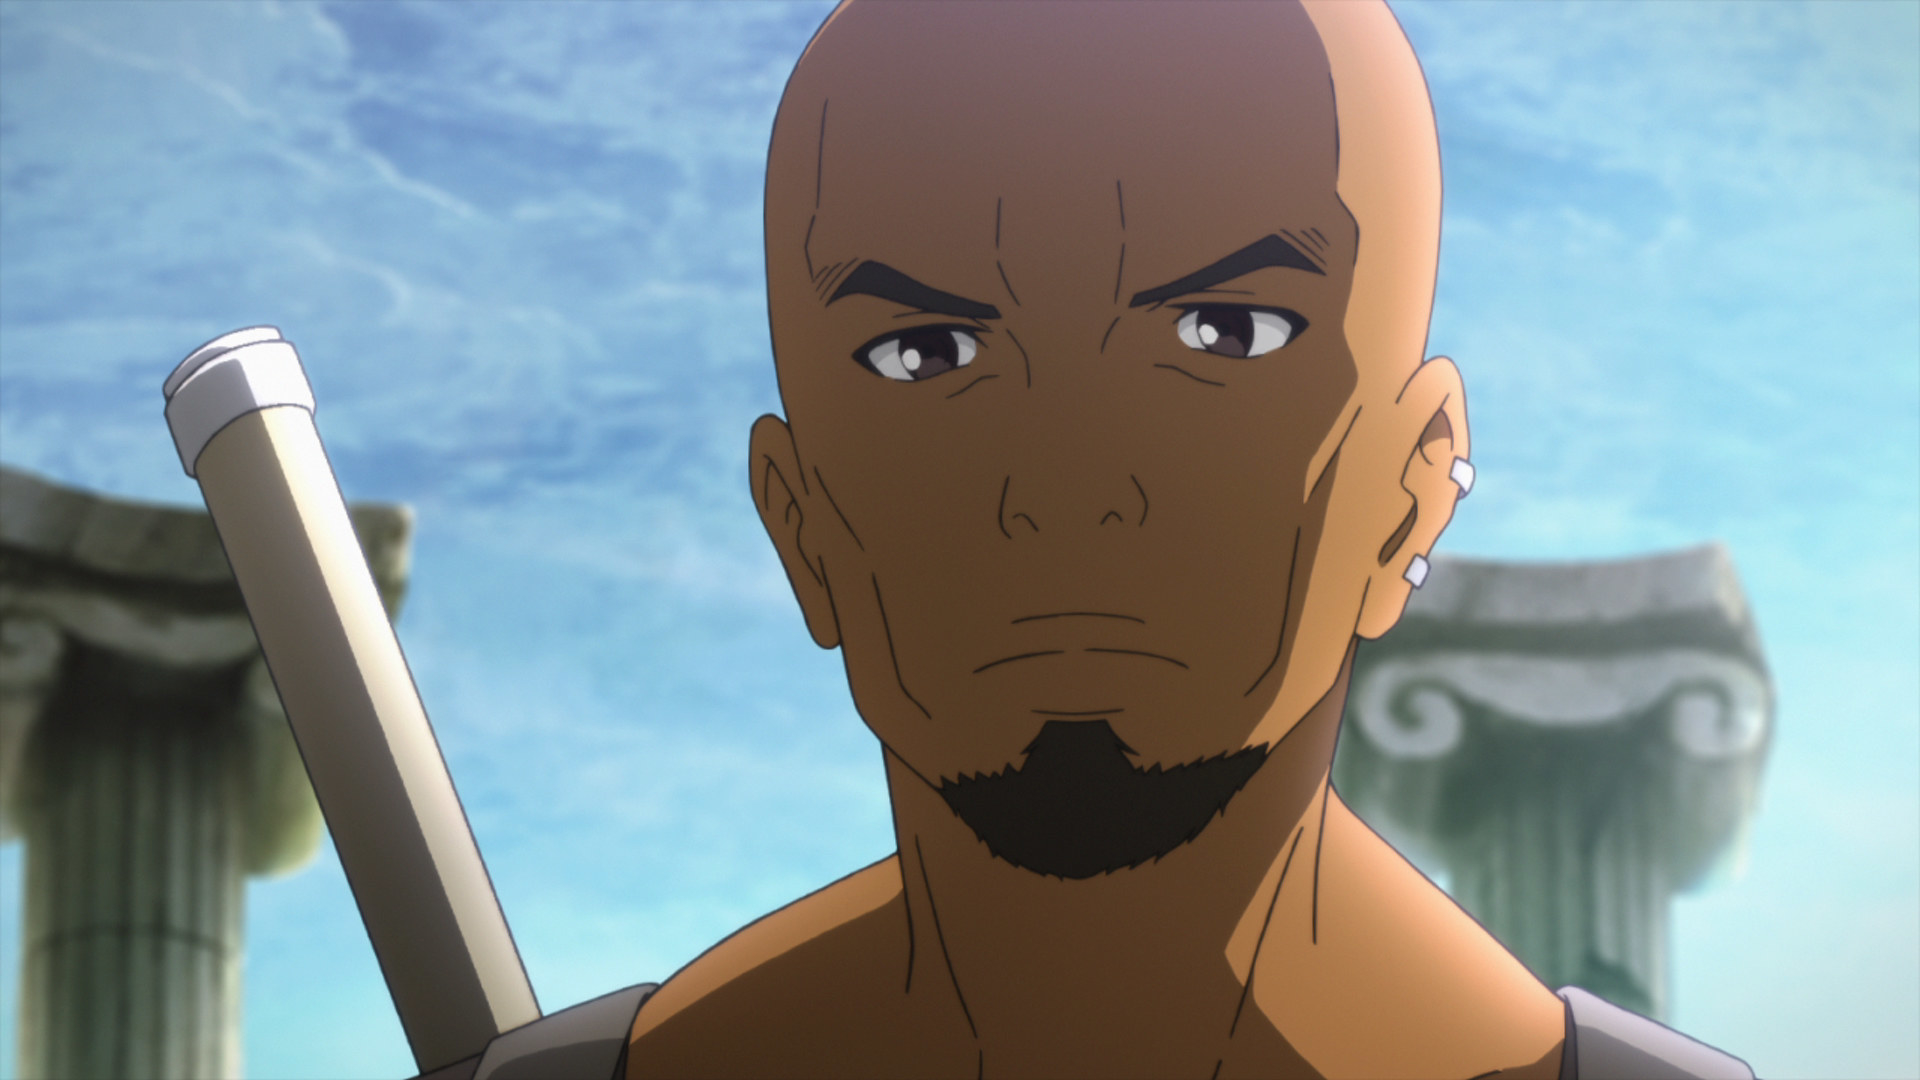 Agil looking intensely at someone while in game